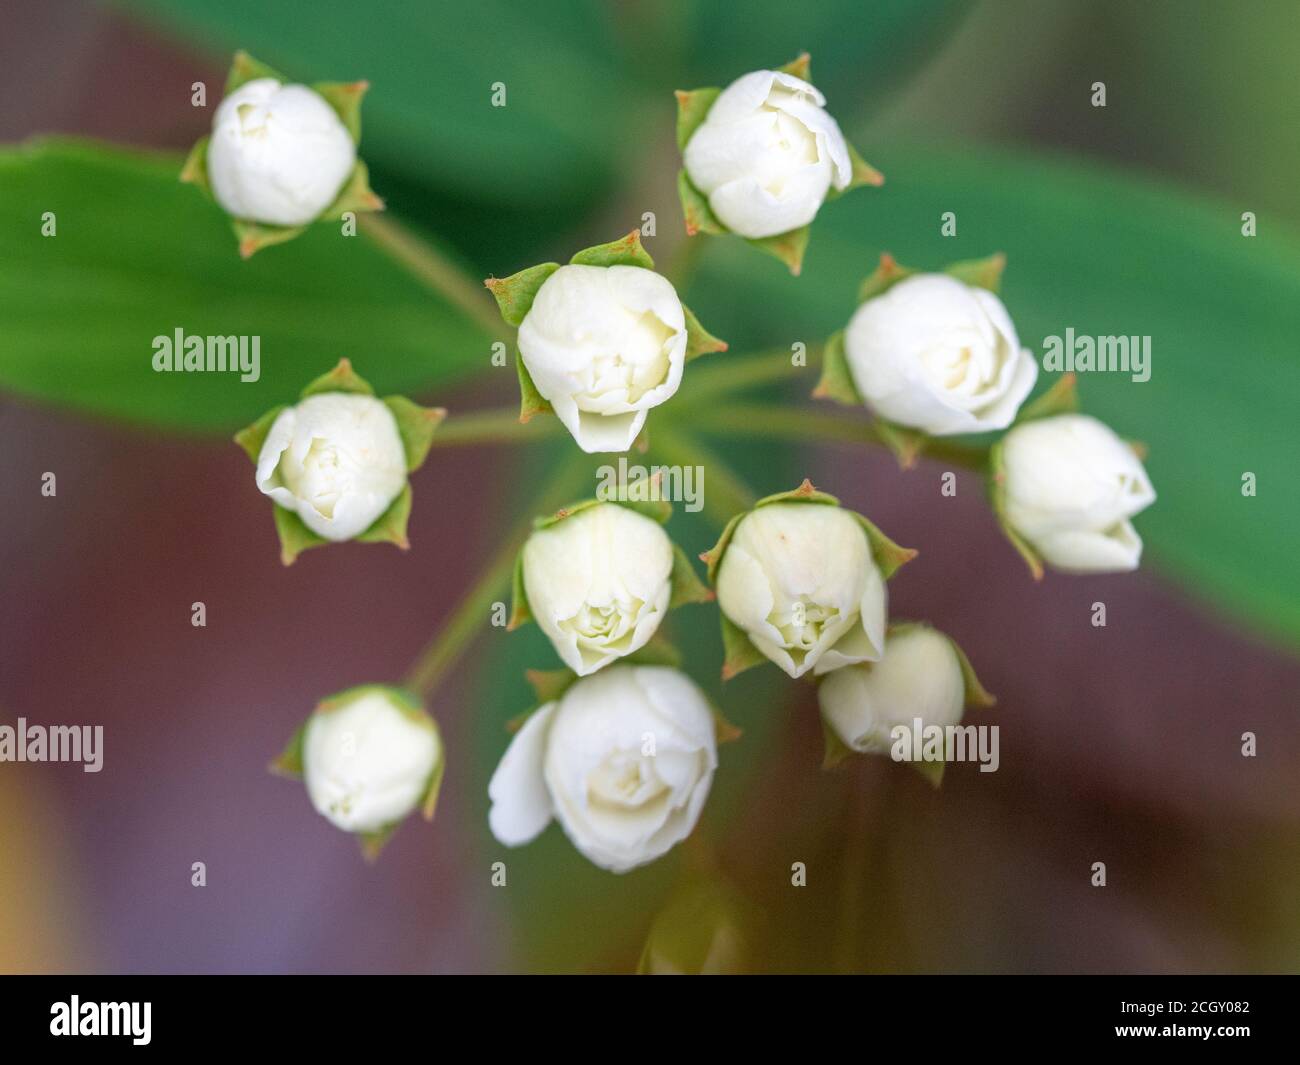 A cluster of tiny white flowers of the May bush, Spiraea, in the process of blooming Stock Photo